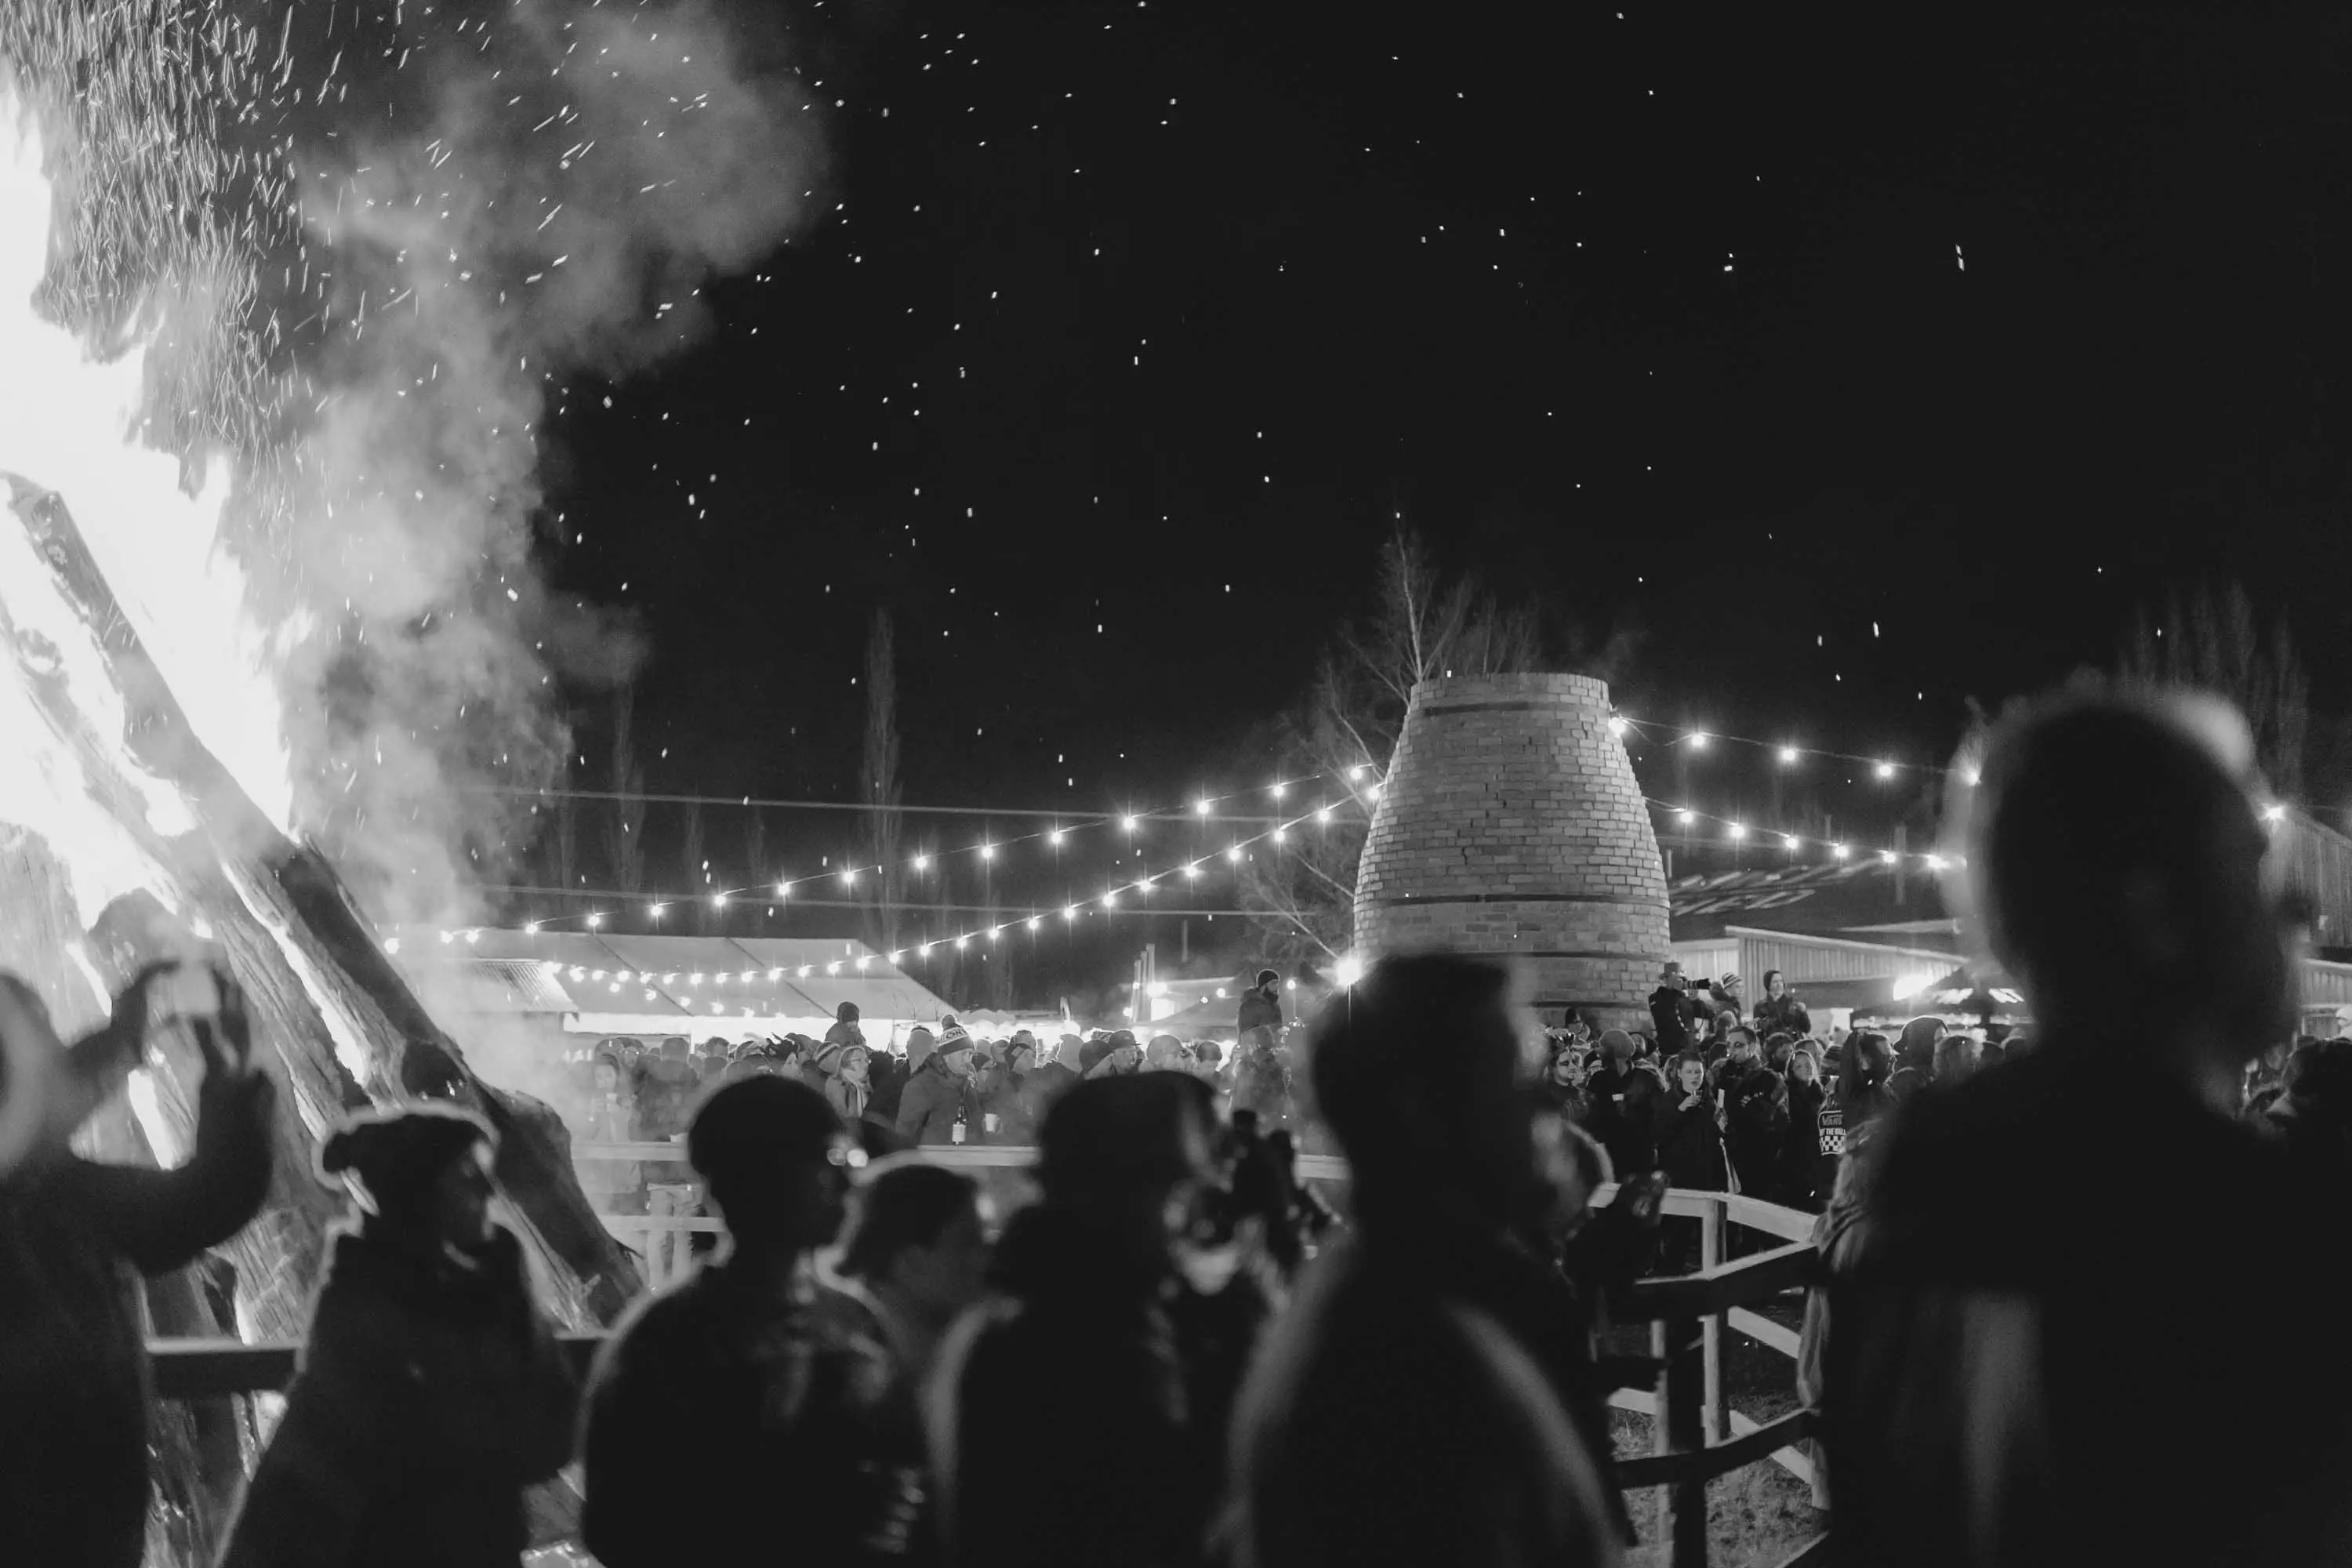 A large group of people gather under lights strung overhead and next to a large bonfire, that billows sparks and smoke into the dark night air.